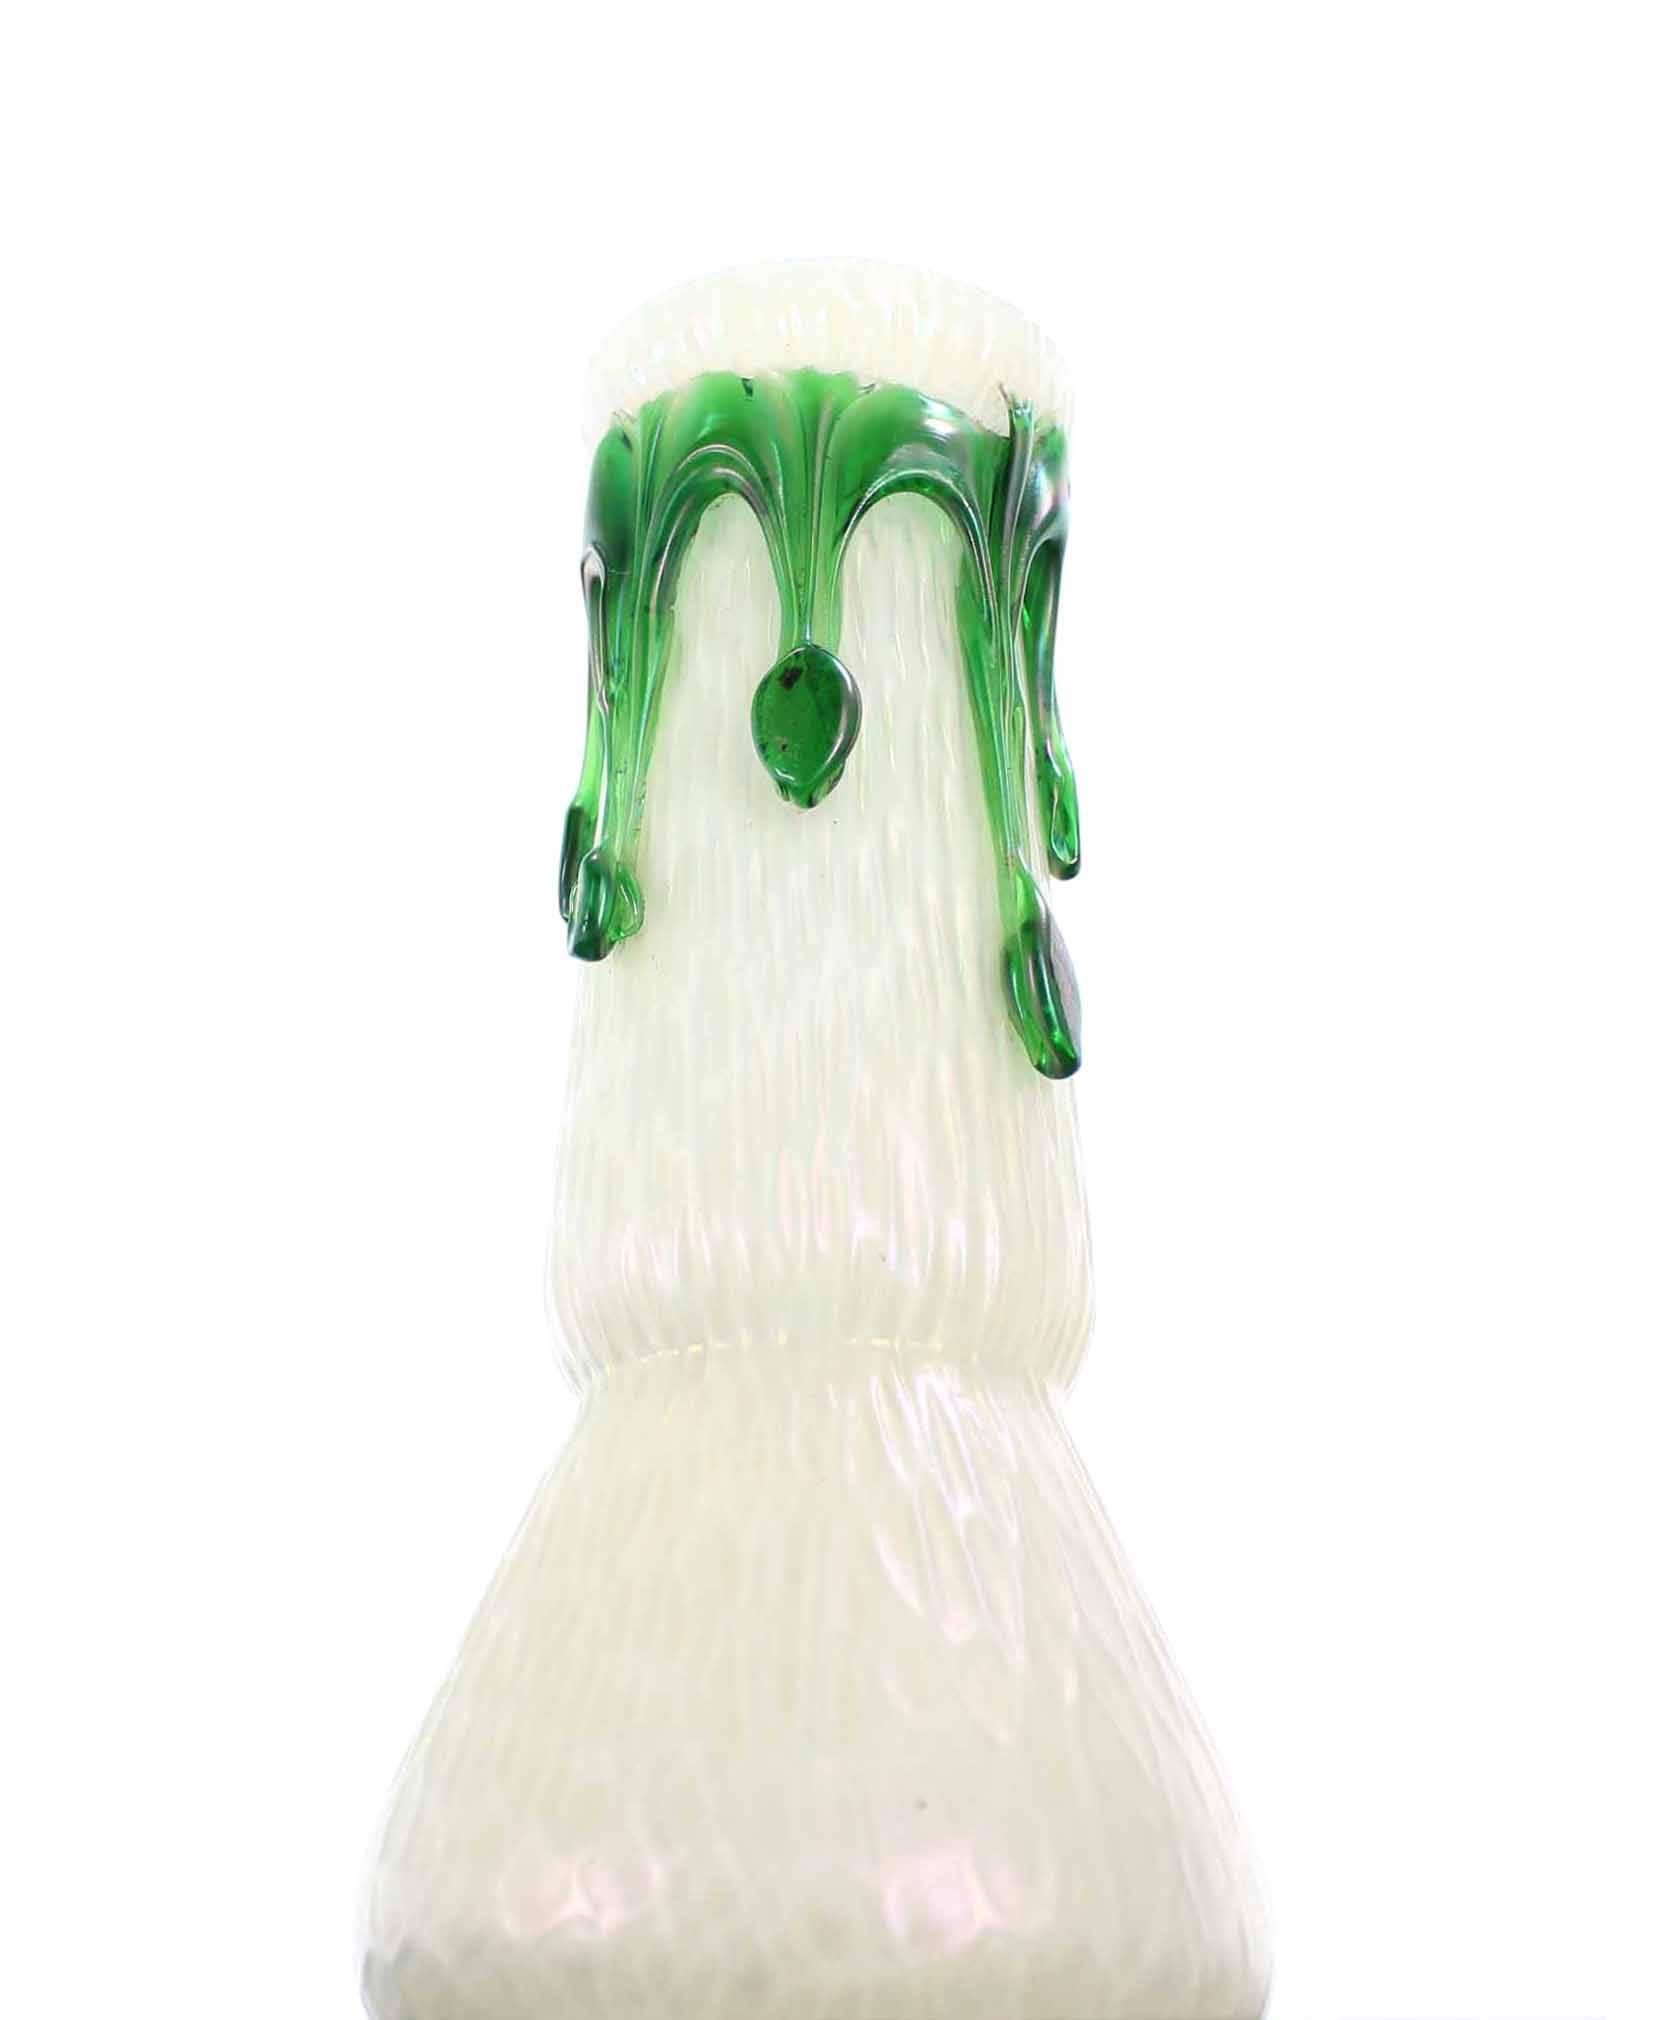 Green Pearl Iridescent Art Glass Vase In Excellent Condition For Sale In Rockaway, NJ